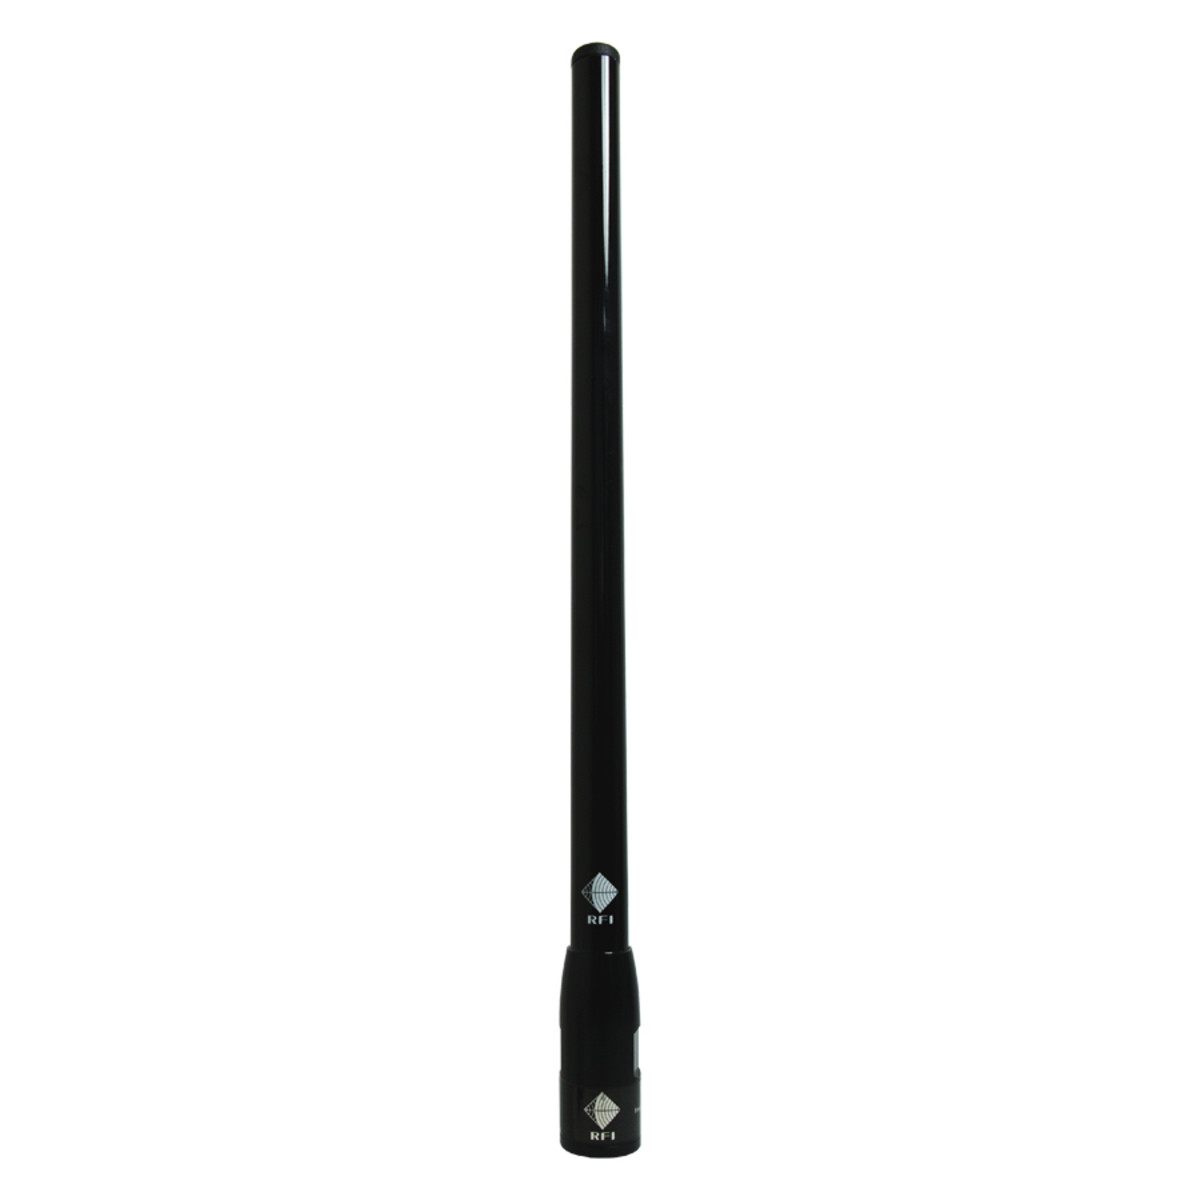 ANT SPARE:UHF 3dBi CDQ3000-B-WHIP